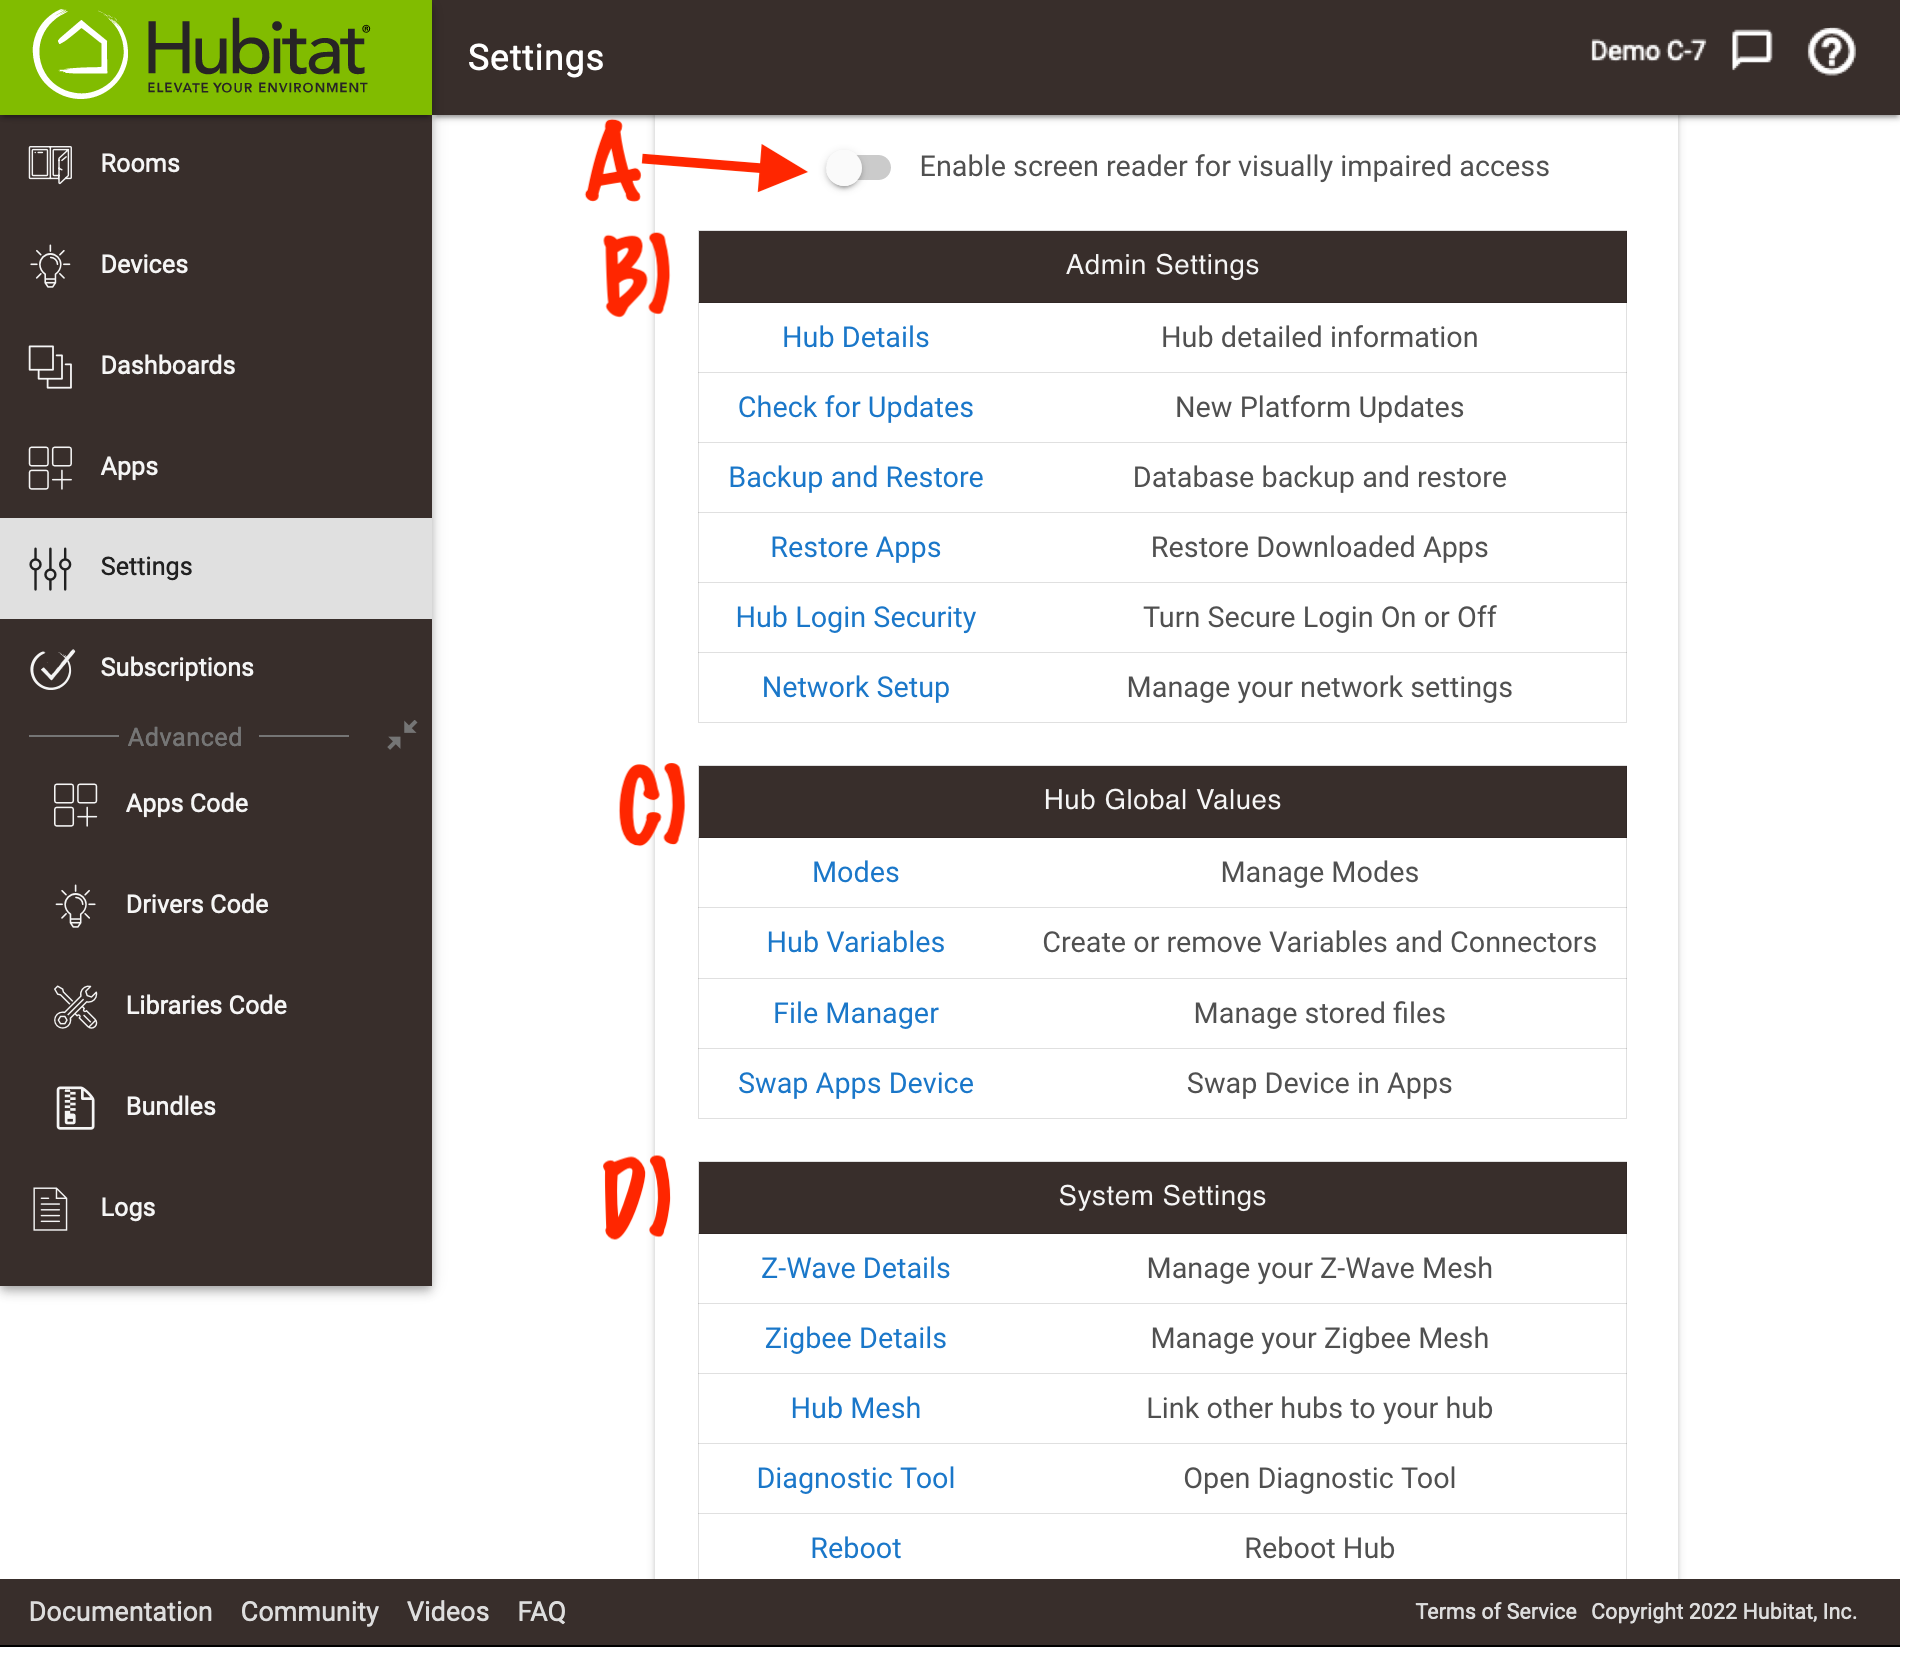 The settings page of your hub has links to various settings, described below.